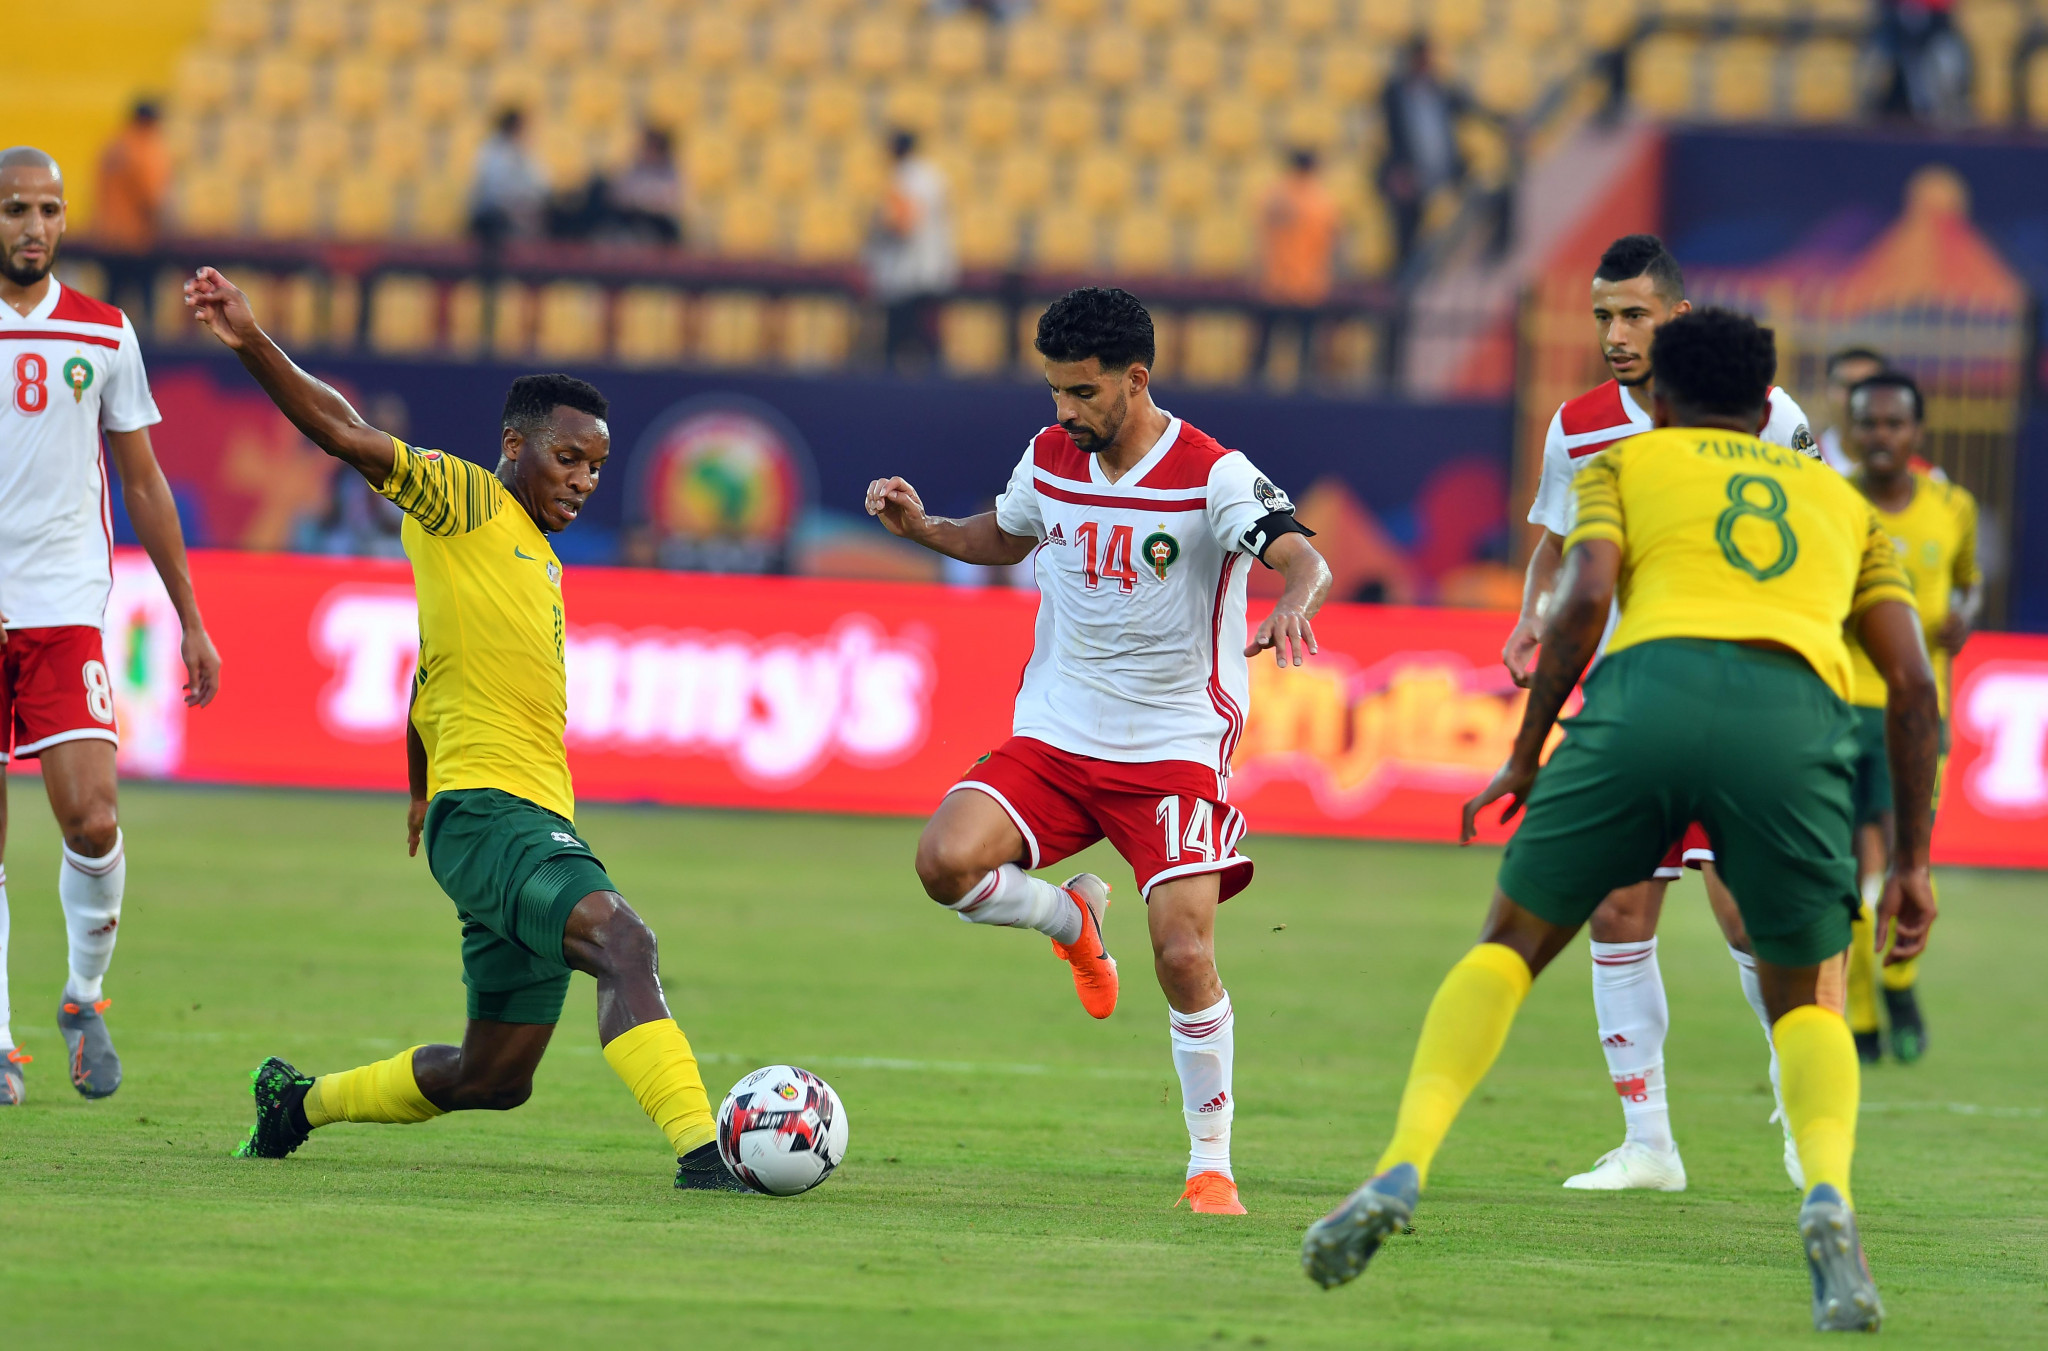 South Africa were due to play Zambia in a friendly this weekend ©Getty Images